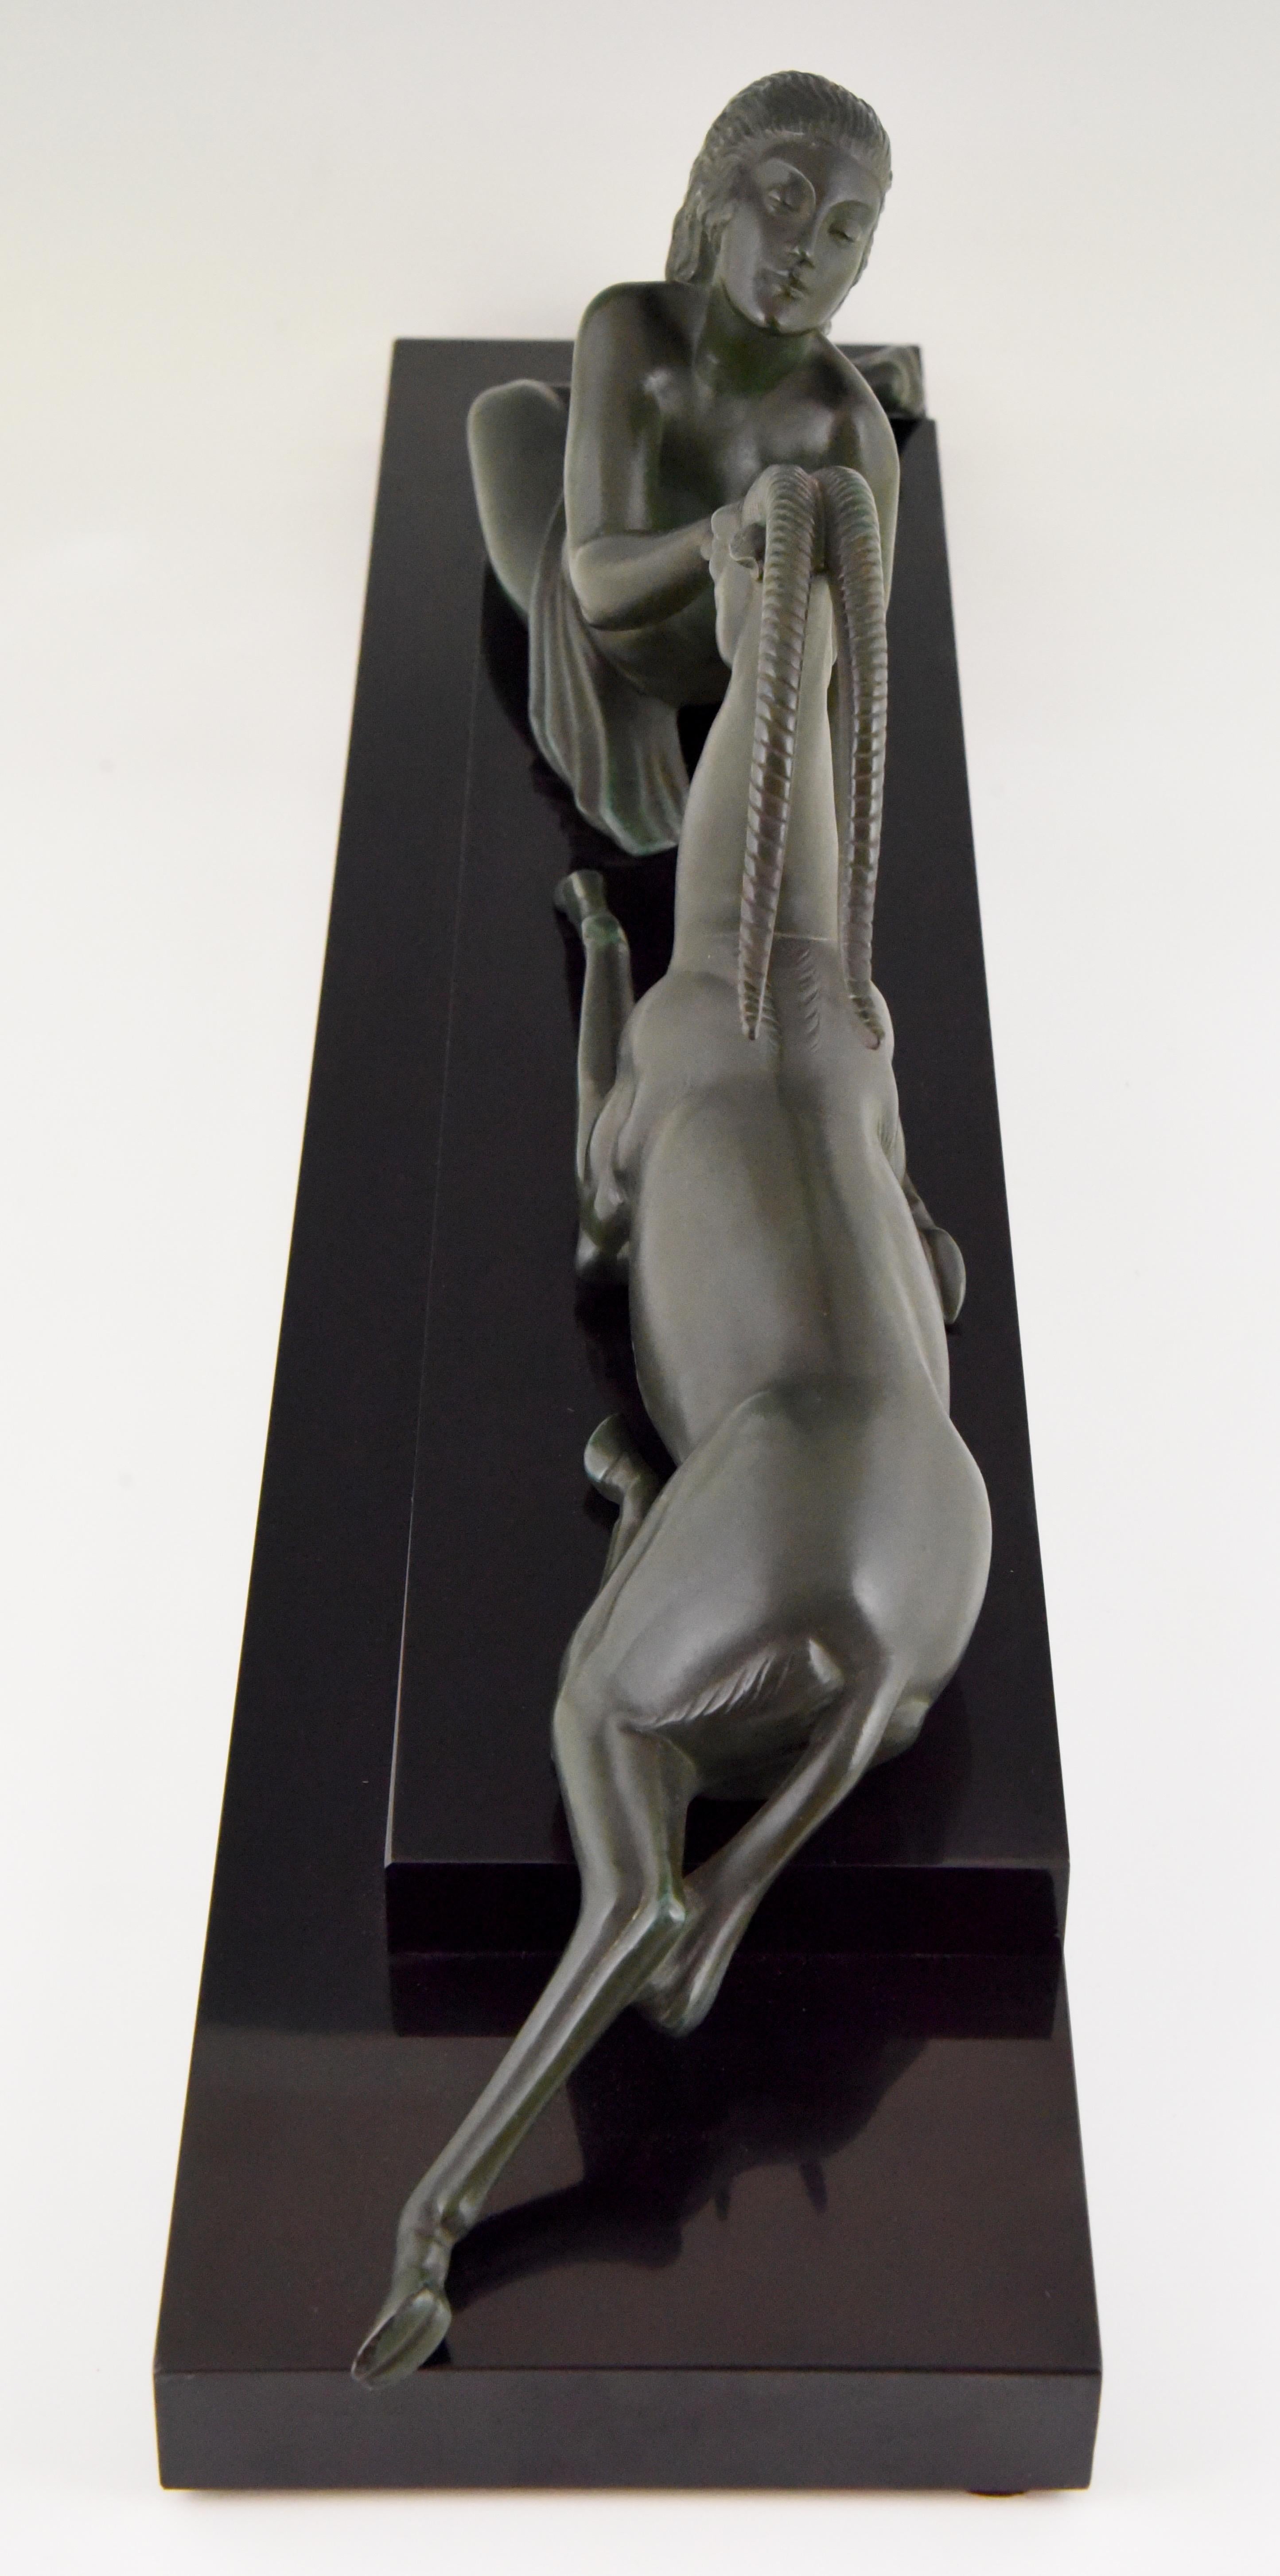 French Art Deco Sculpture Nude with Gazelle Seduction by Fayral Pierre Le Faguays